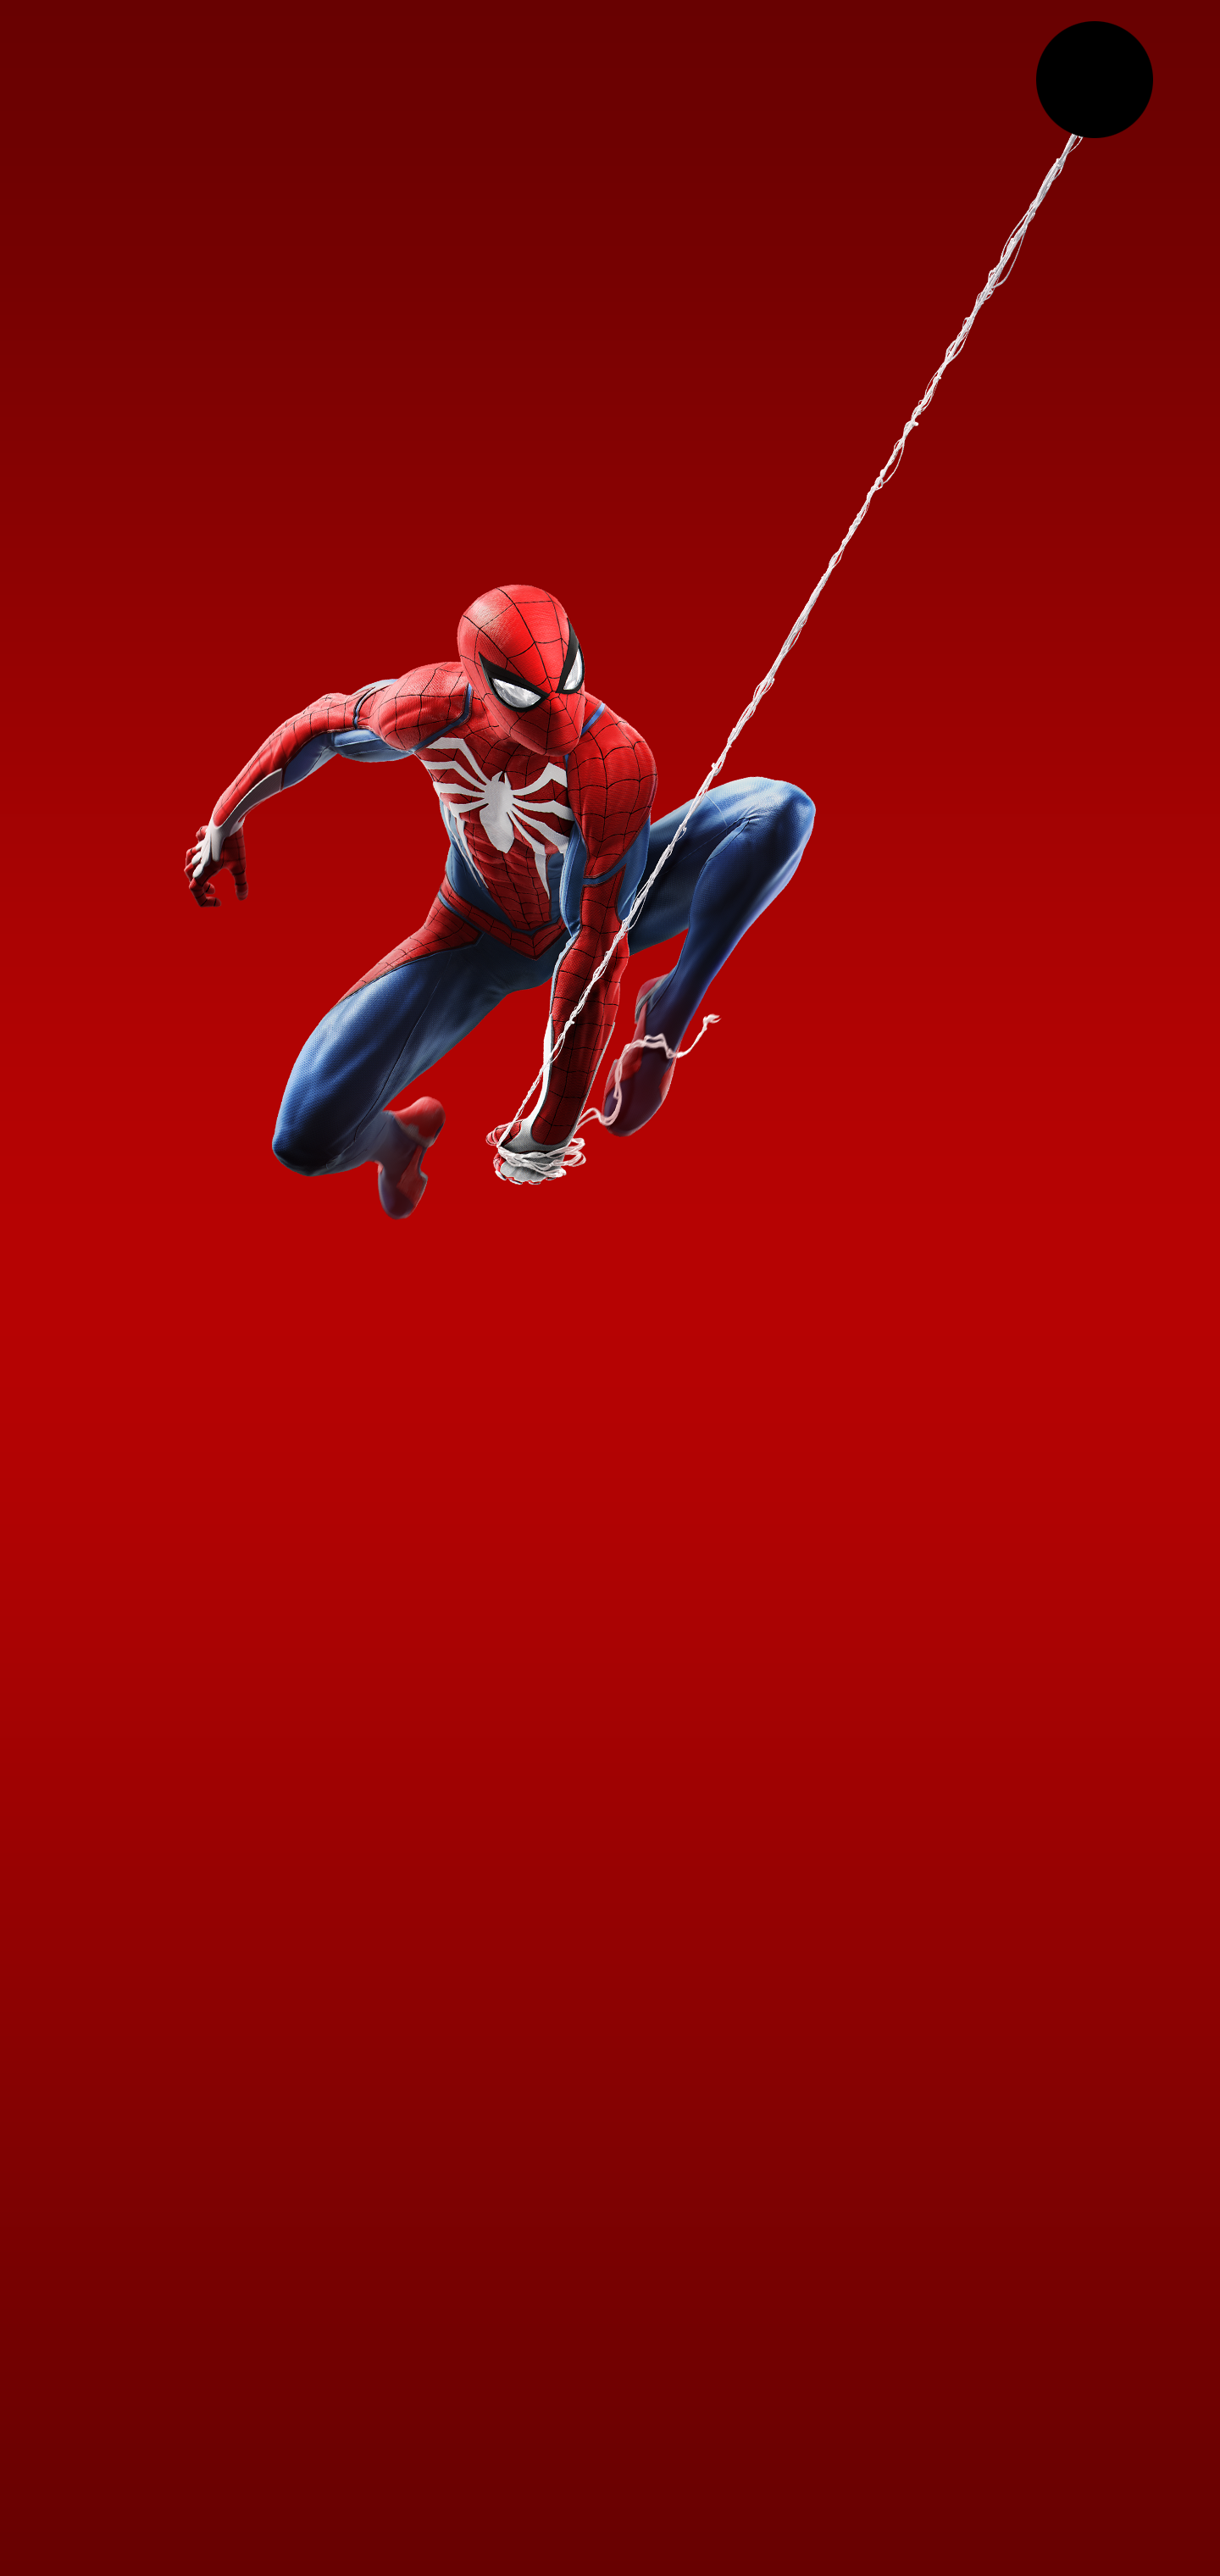 galaxy live wallpapers hd,red,spider man,fictional character,superhero,extreme sport